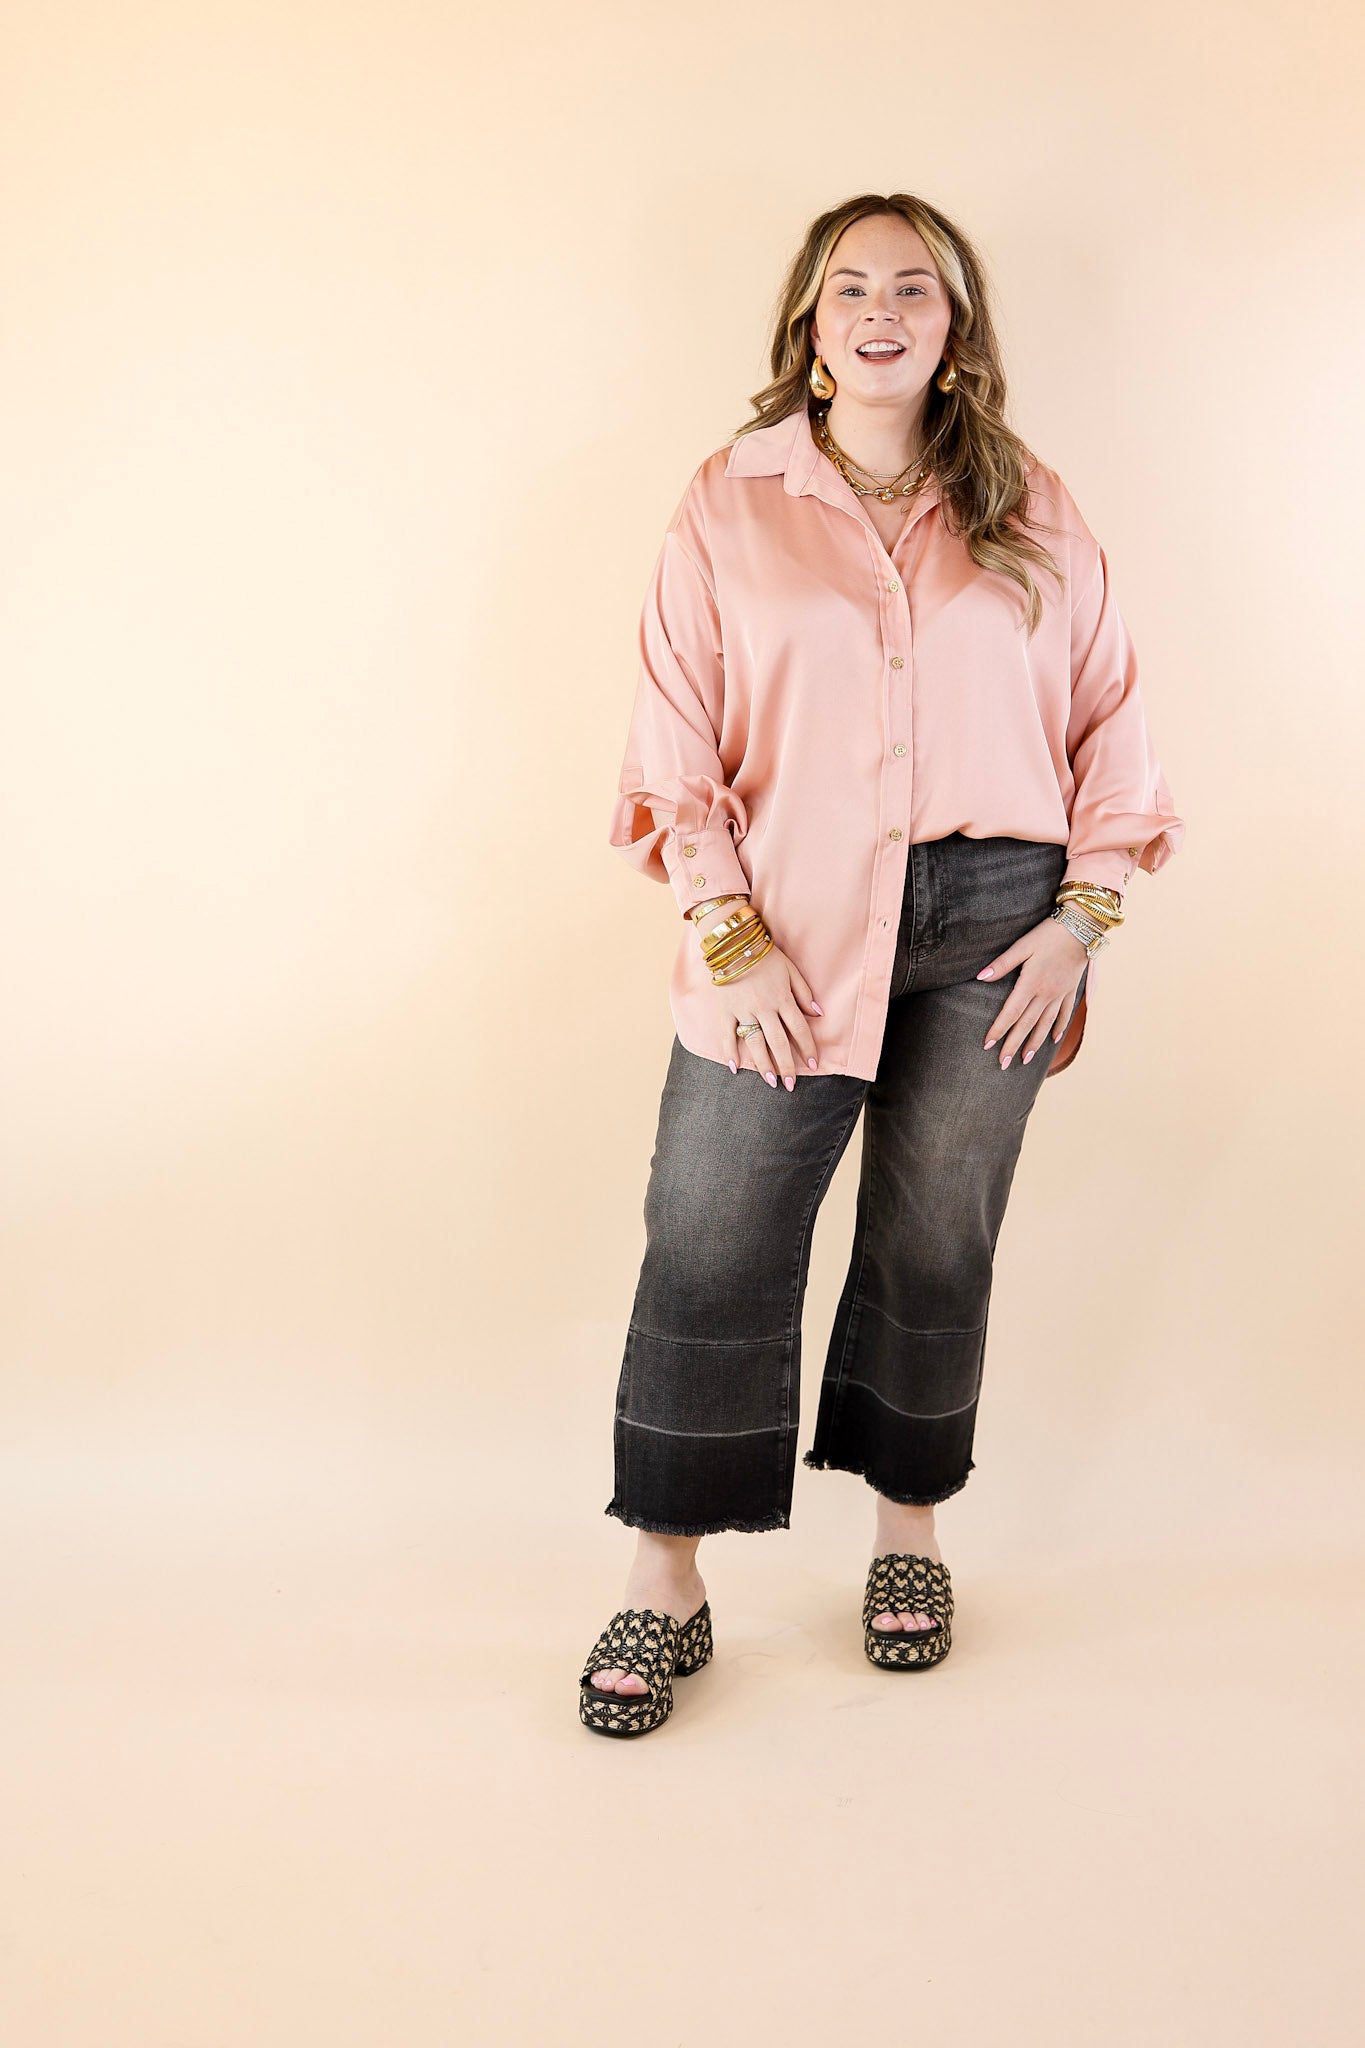 Tell Me Something Good Long Sleeve Button Up Top in Peach Pink - Giddy Up Glamour Boutique